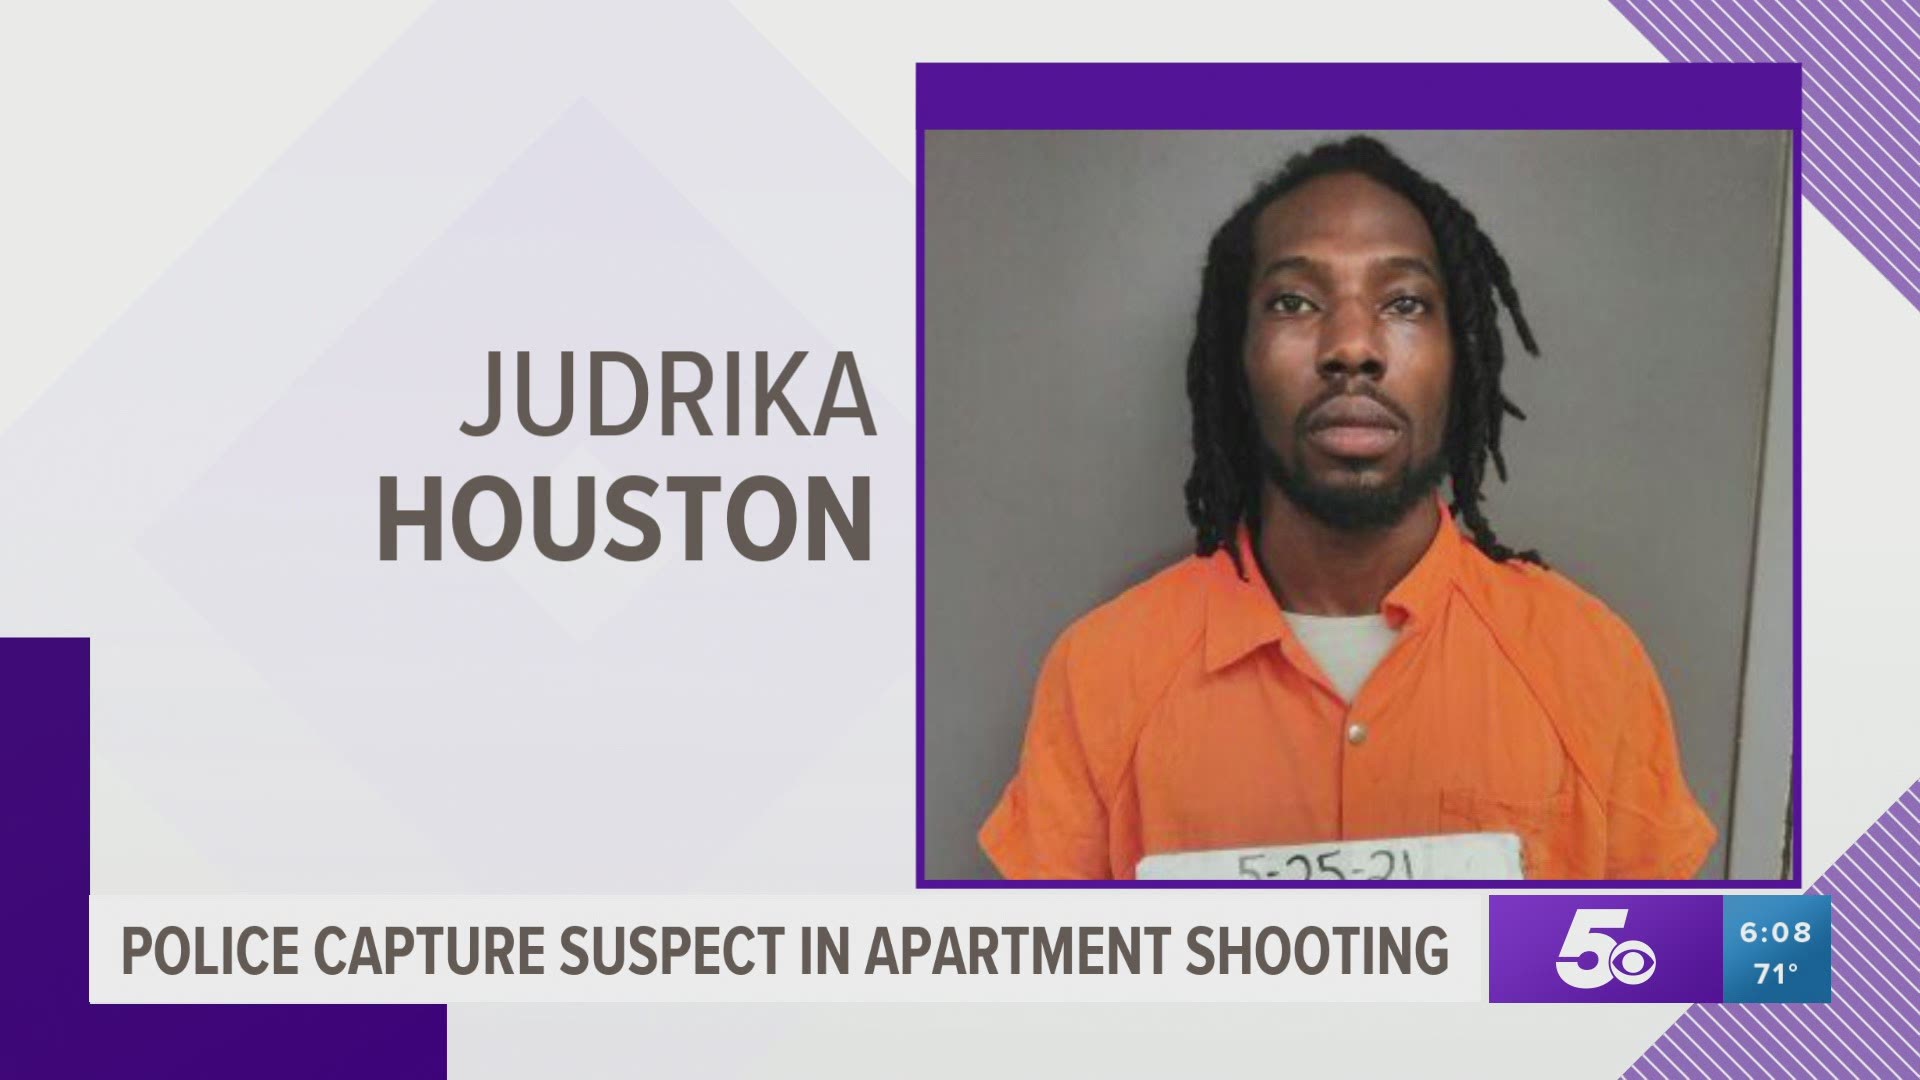 Fort Smith police say Judrika Houston has been arrested with multiple charges.